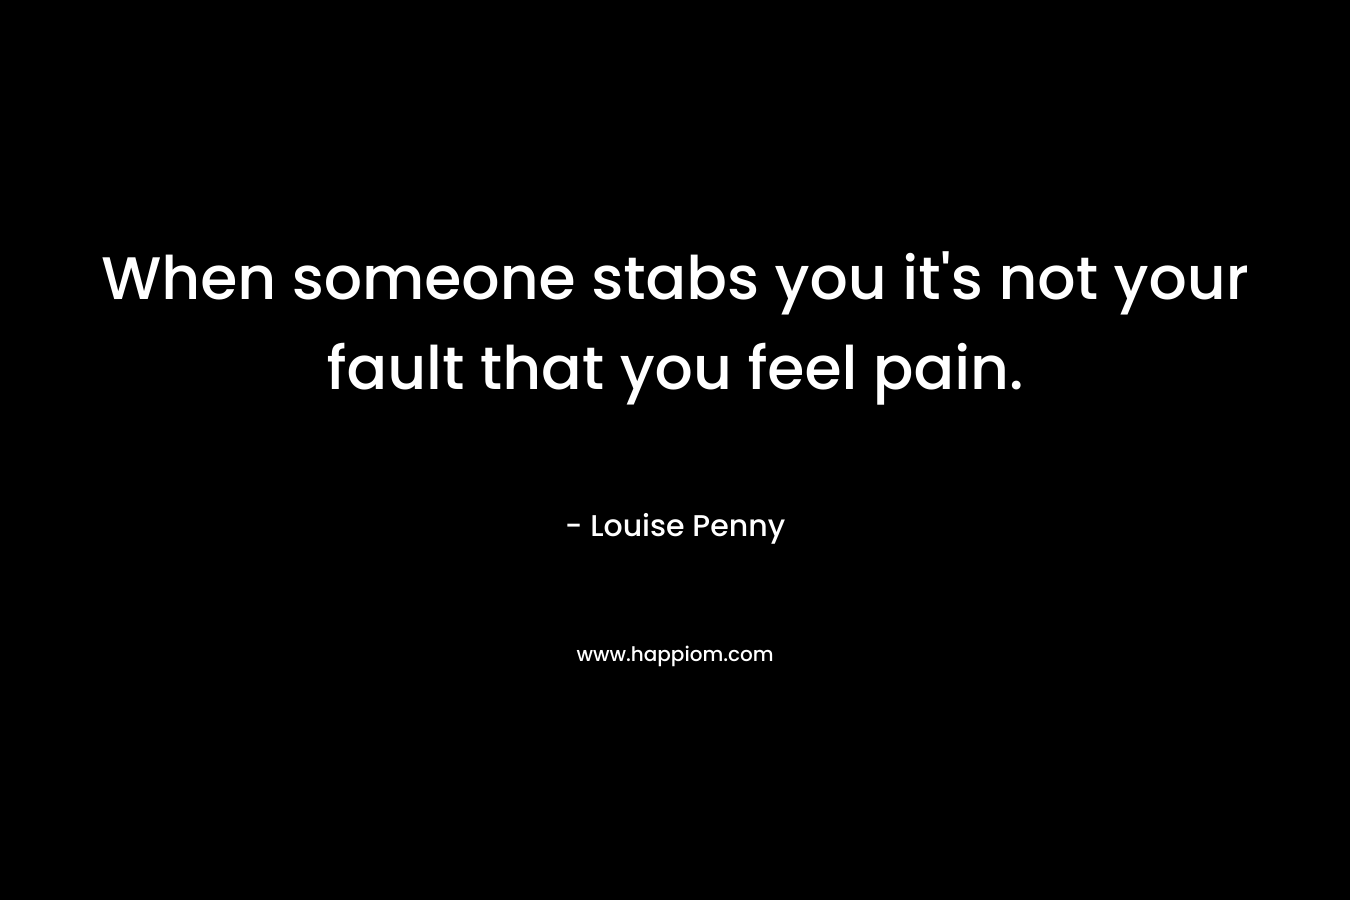 When someone stabs you it’s not your fault that you feel pain. – Louise Penny